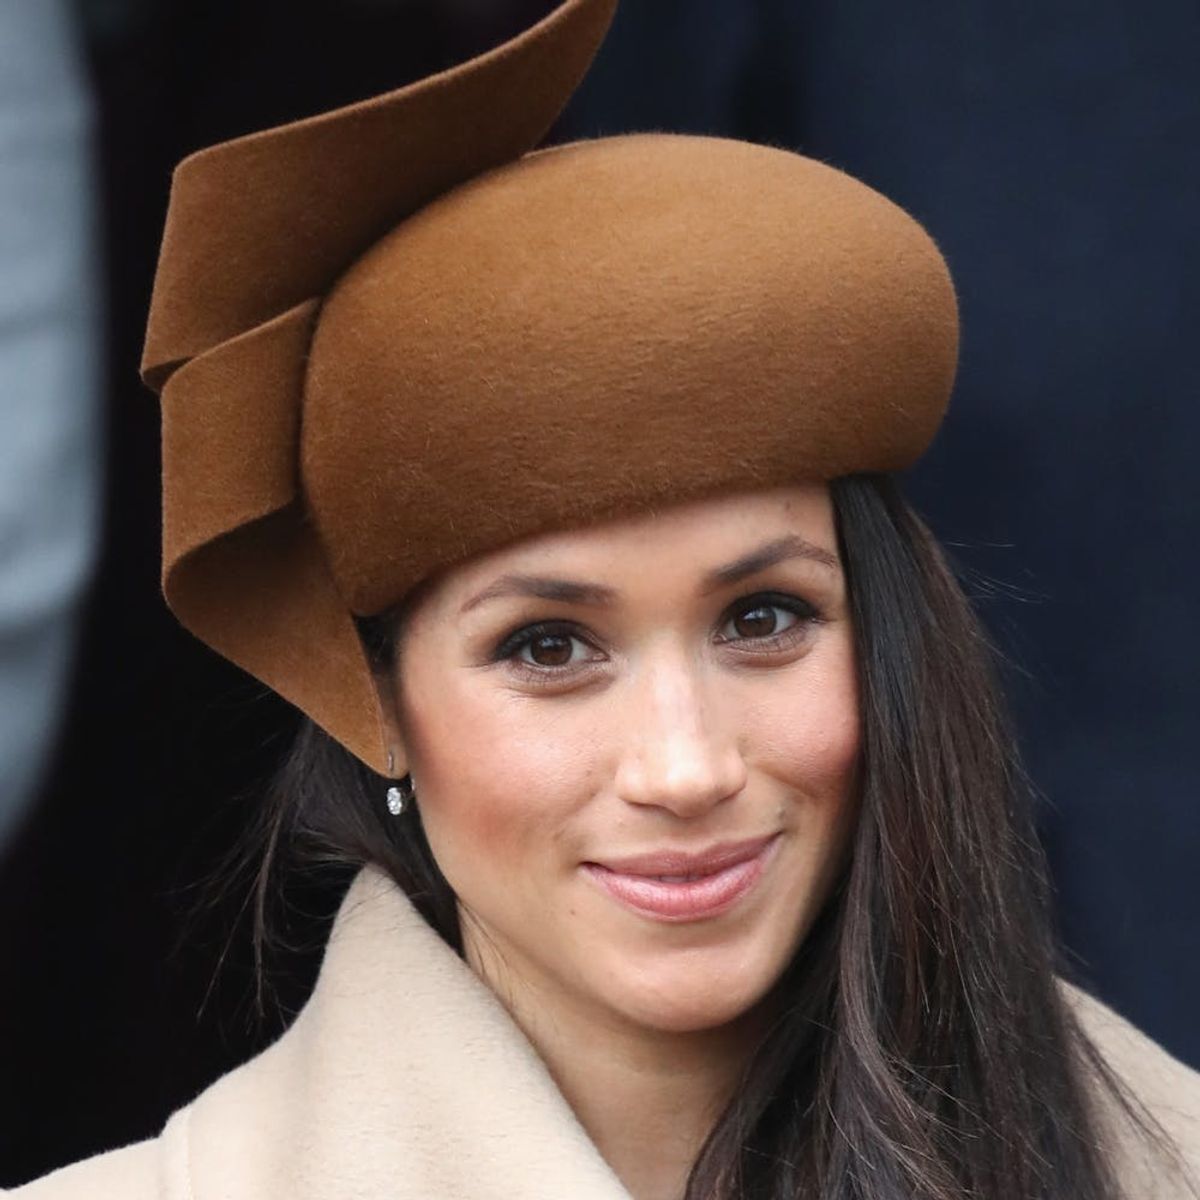 See What Meghan Markle Wore for Her Christmas Debut With the Royal Family